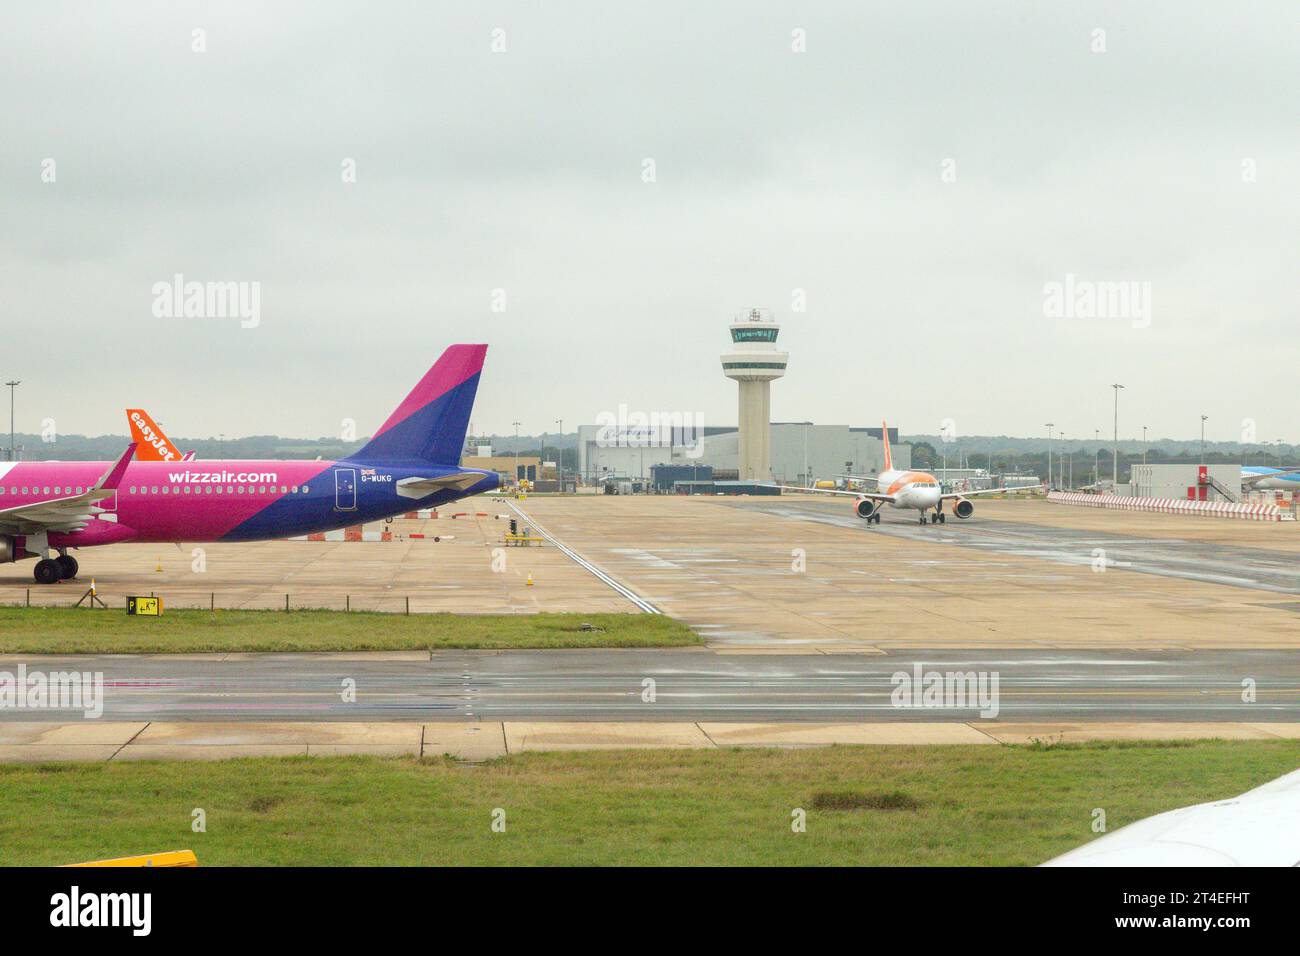 Gatwick airport, Horley, Gatwick, West Sussex, United Kingdom. Stock Photo